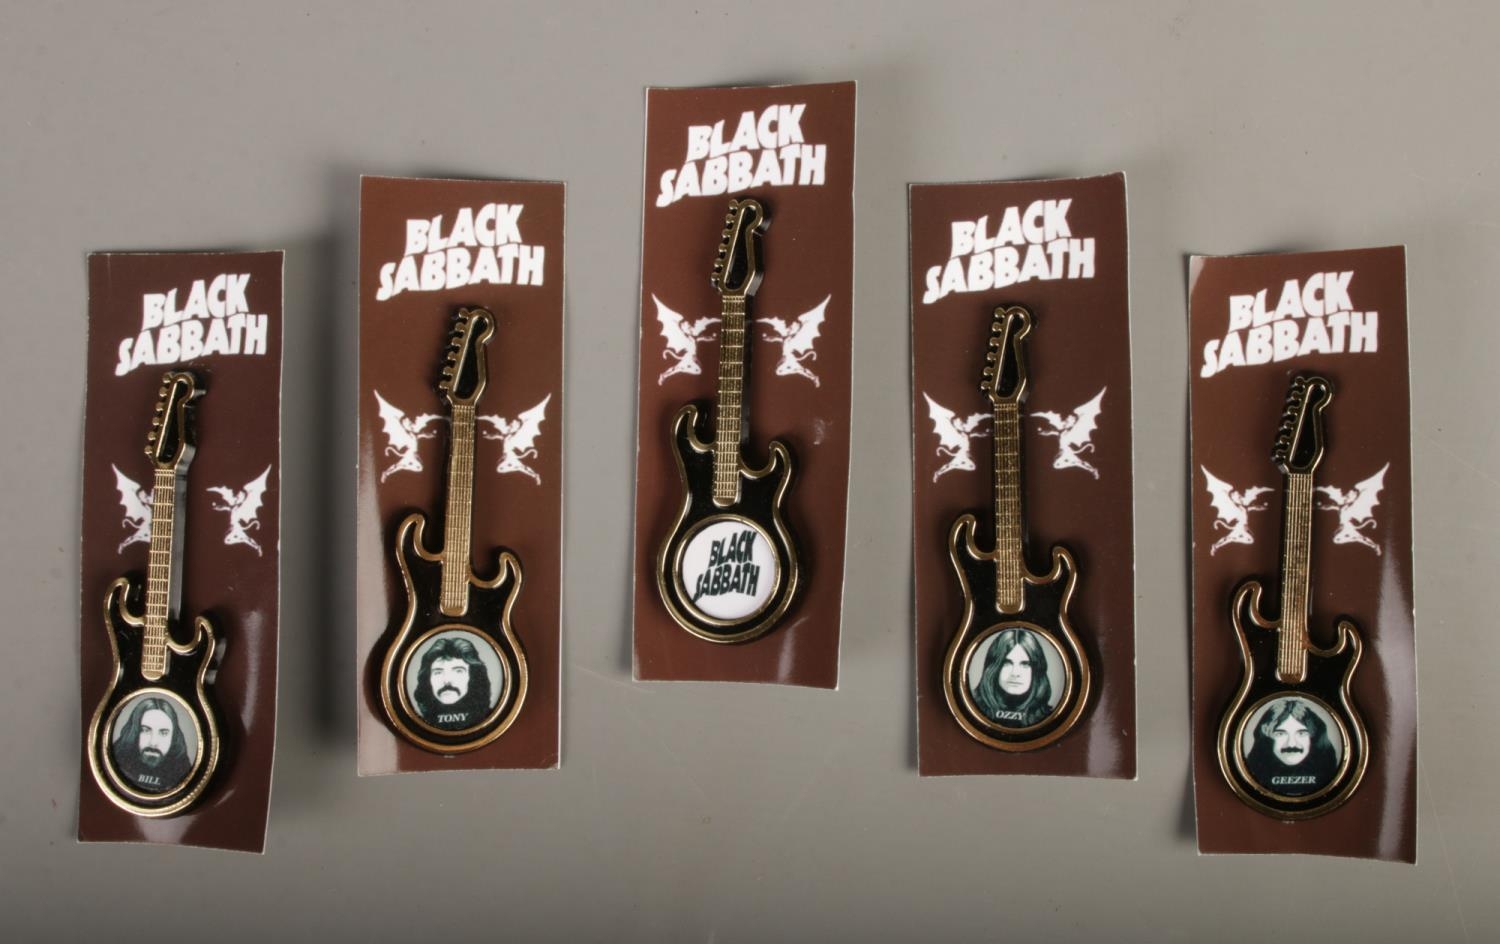 Black Sabbath Plastic Guitar Brooches, each featuring band member & logo, backed on card.